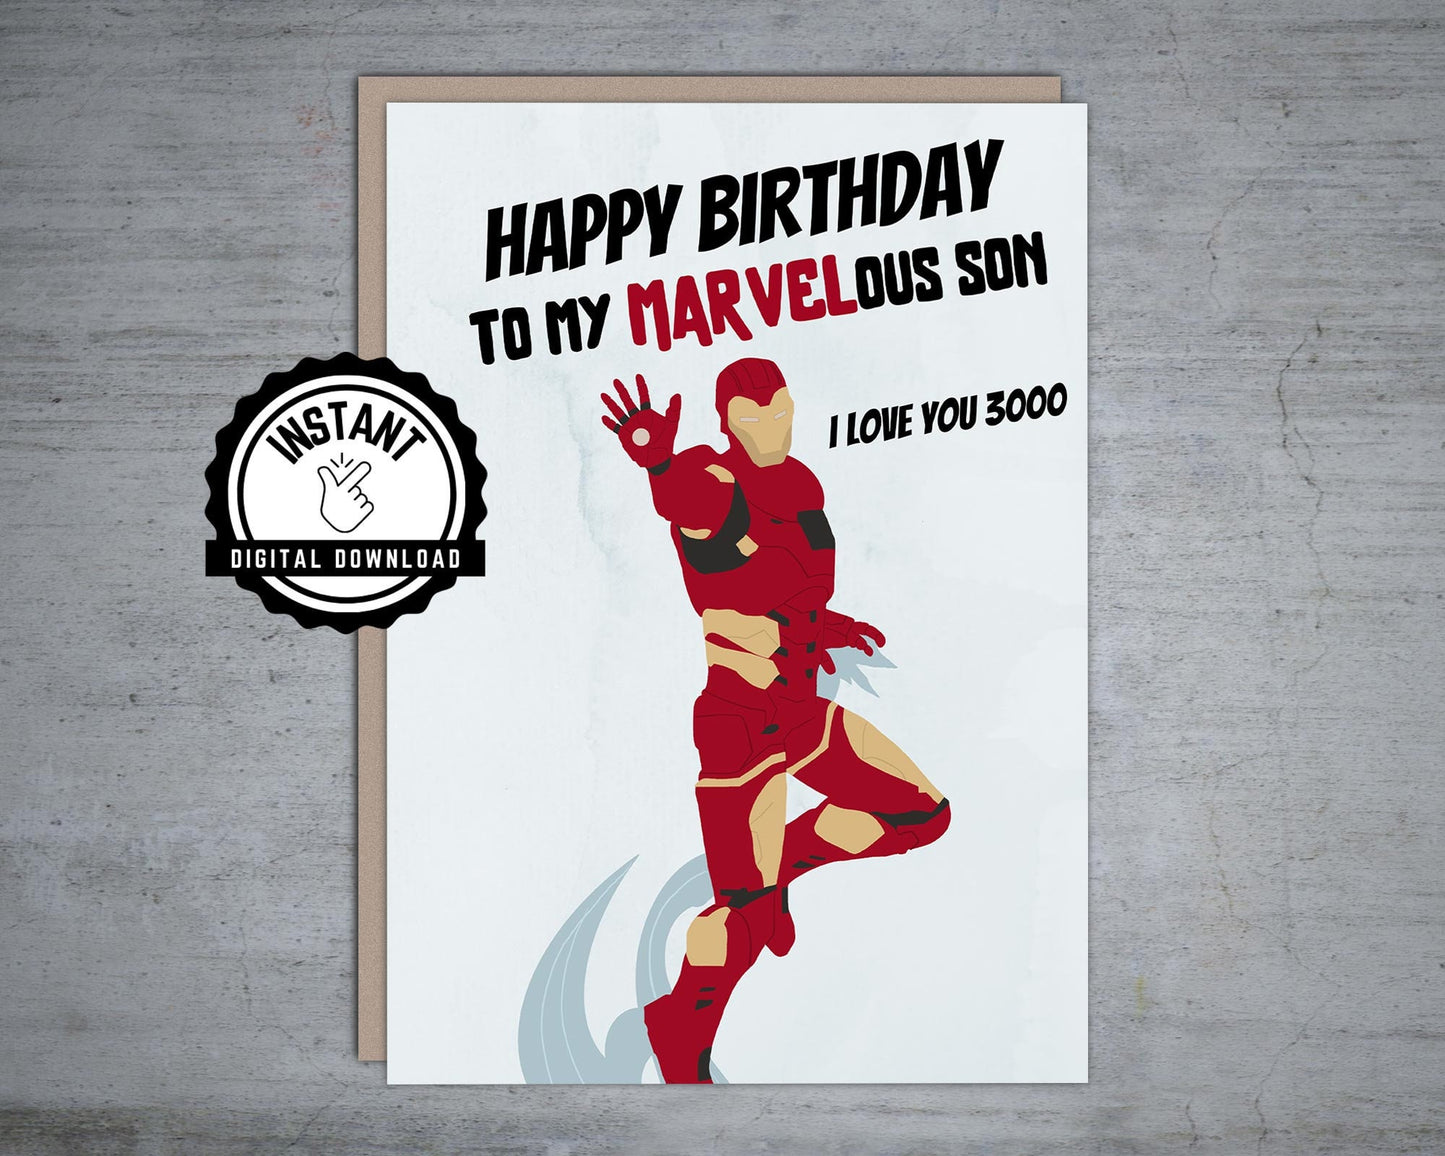 I love you 3000 | Happy Birthday to my Marvelous Son | Birthday Card Printable | Foldable 5X7 Instant Digital Download